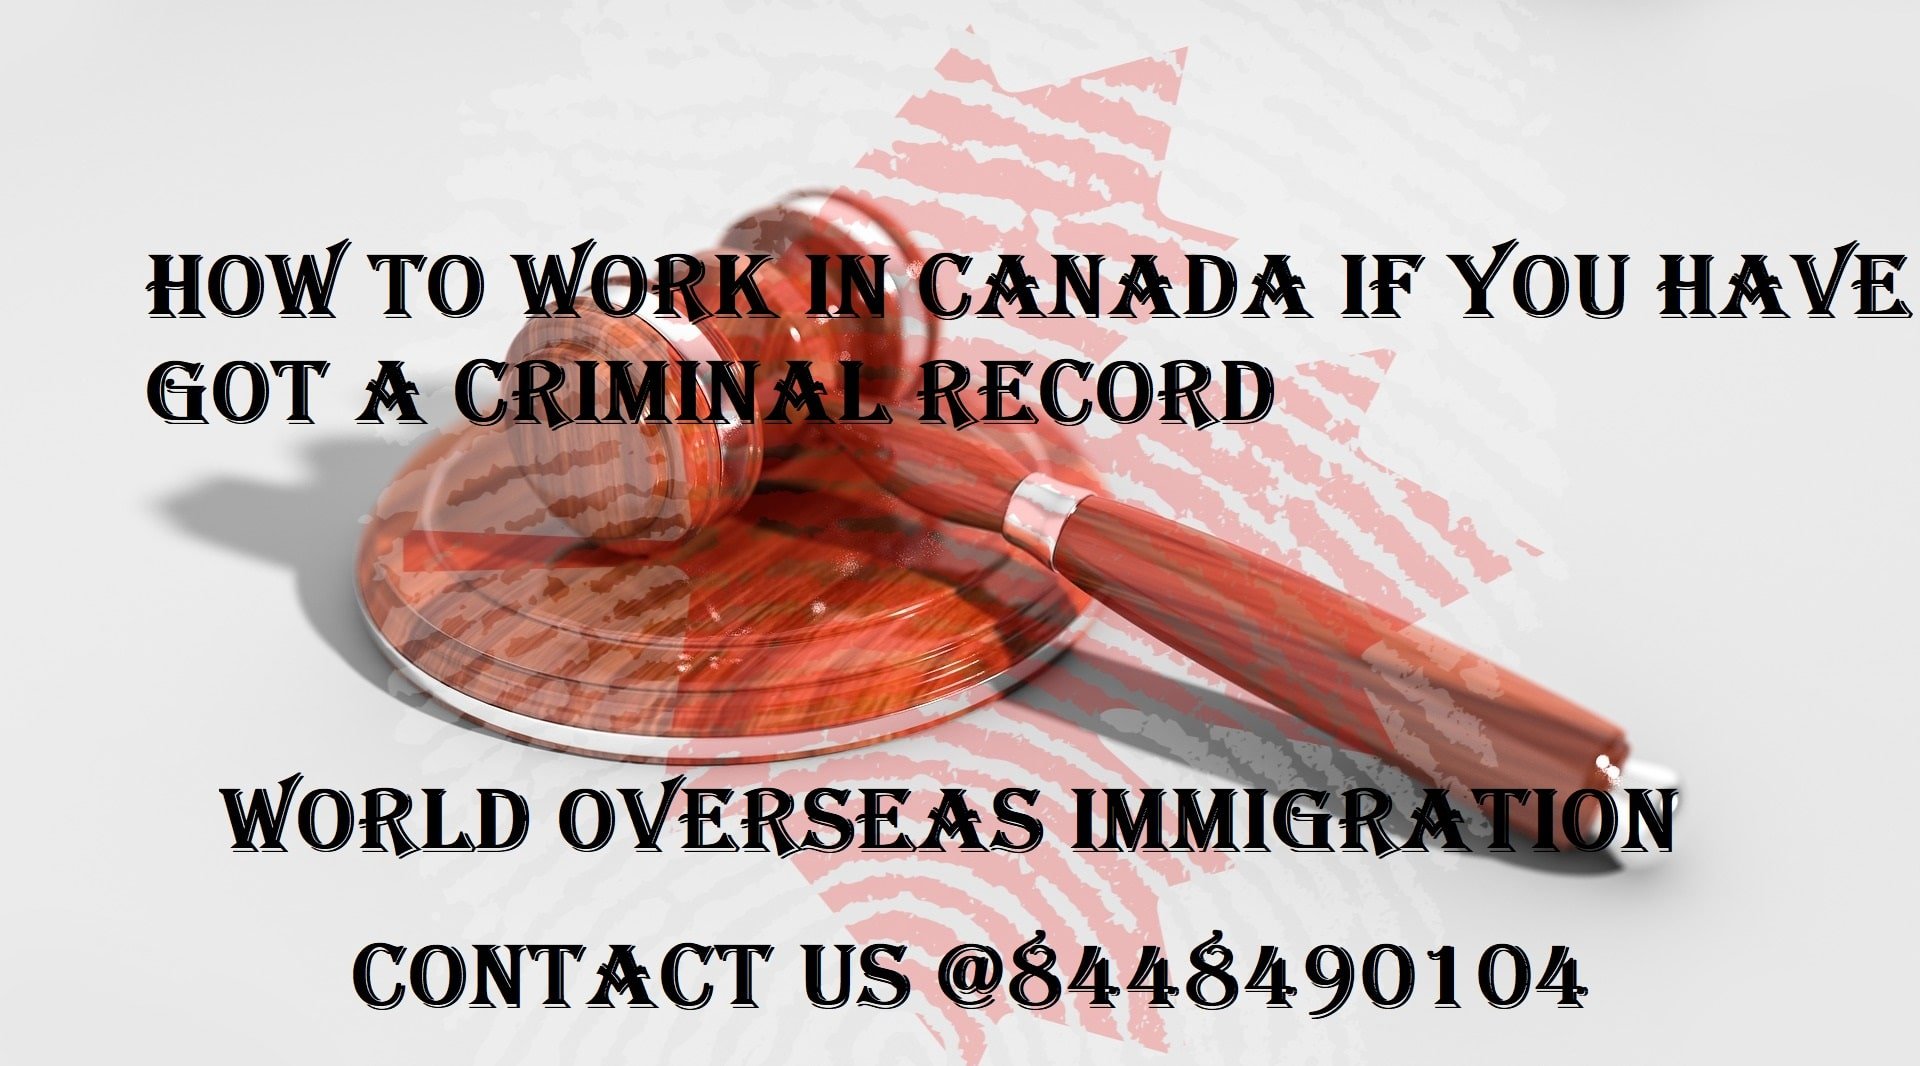 How to work in Canada if you have got a criminal record